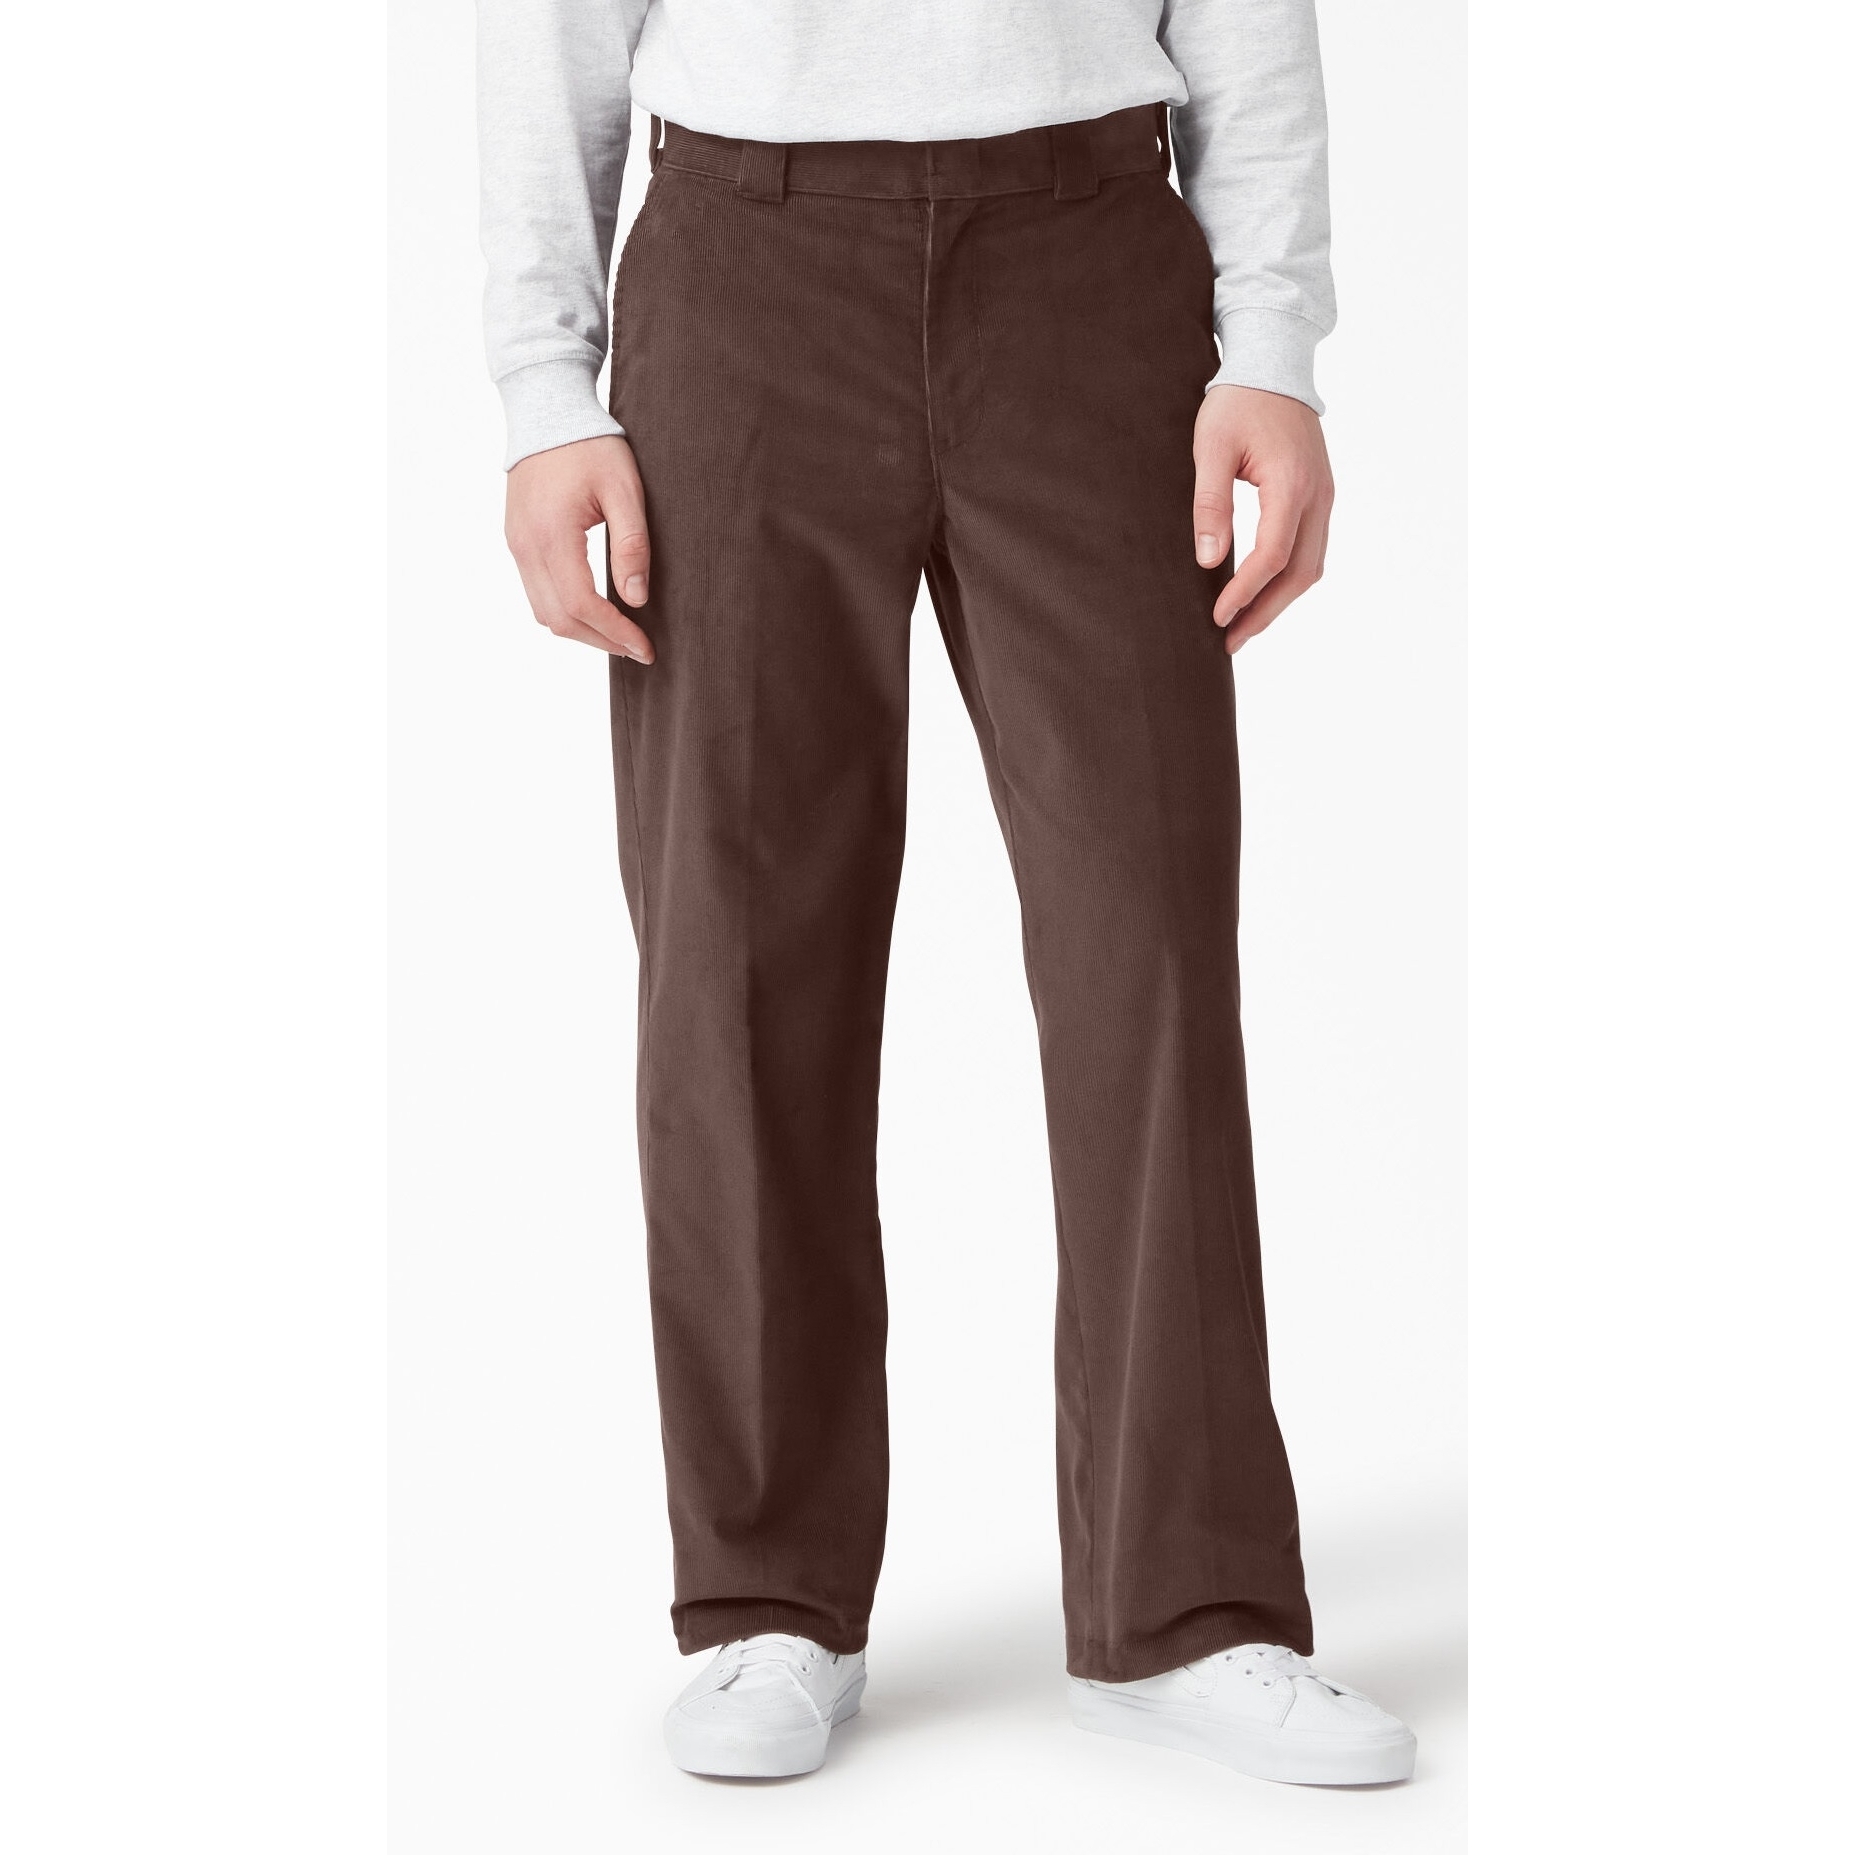 Corduroy Trousers - Buy Corduroy Trousers online in India